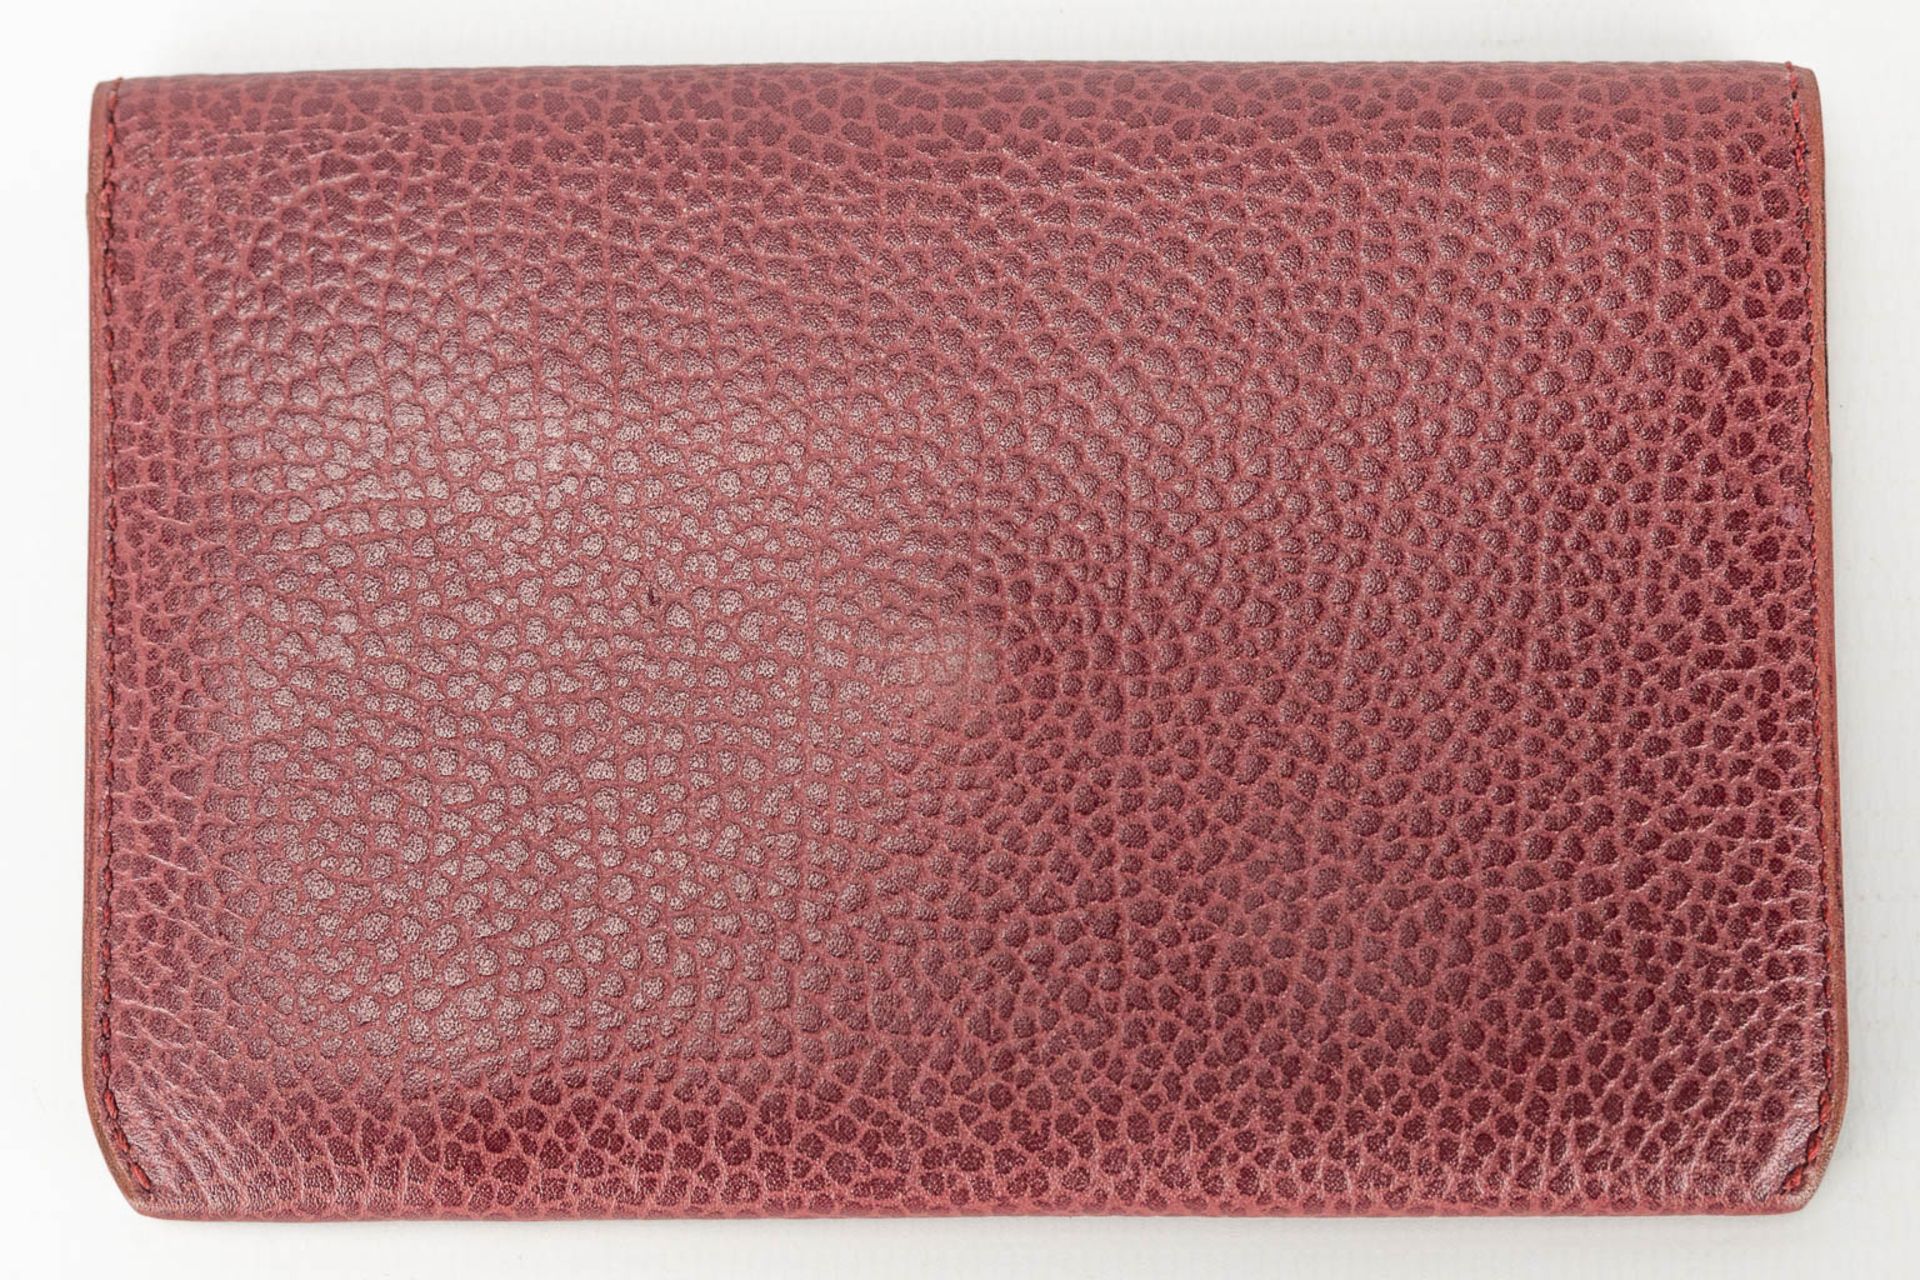 A collection of 3 ladies wallets made of leather and marked Delvaux - Image 14 of 14